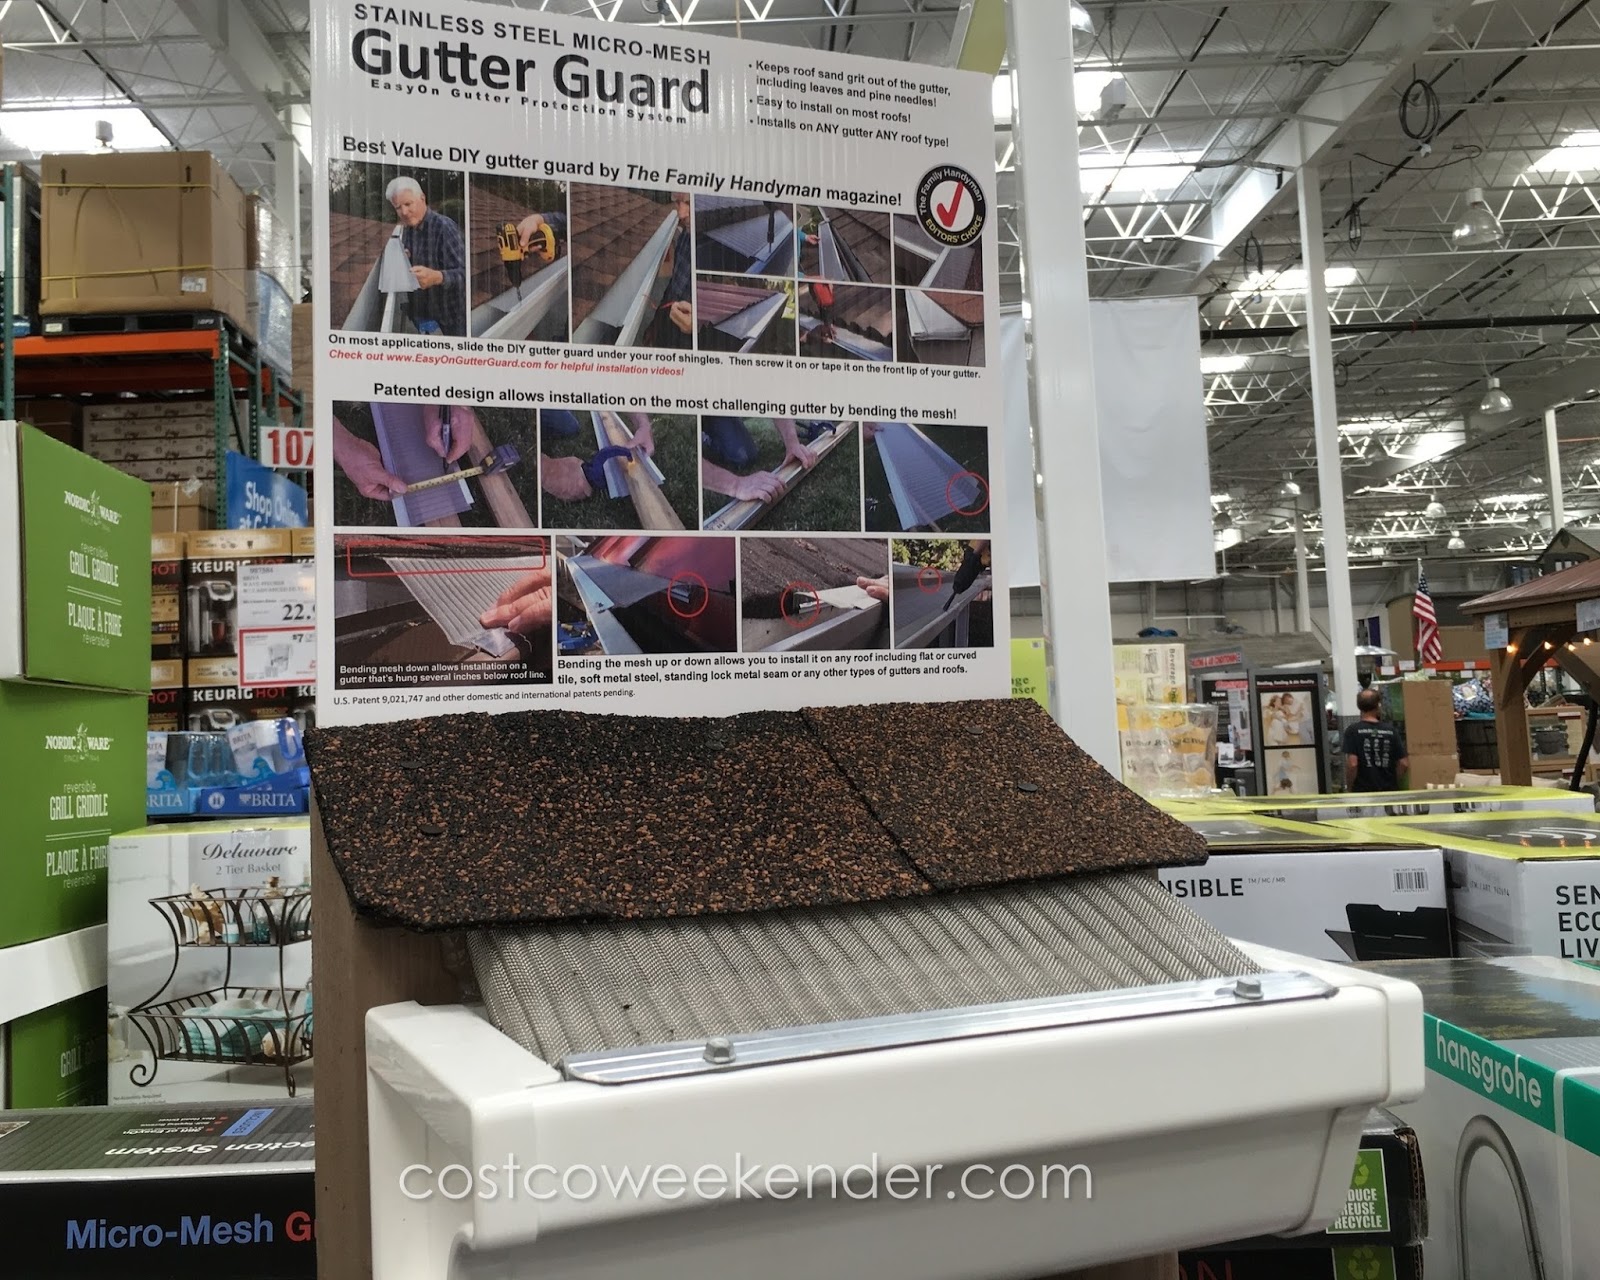 EasyOn Gutter Guard Stainless Steel Micro-Mesh Gutter Protection System Stainless Steel Gutter Guards Costco